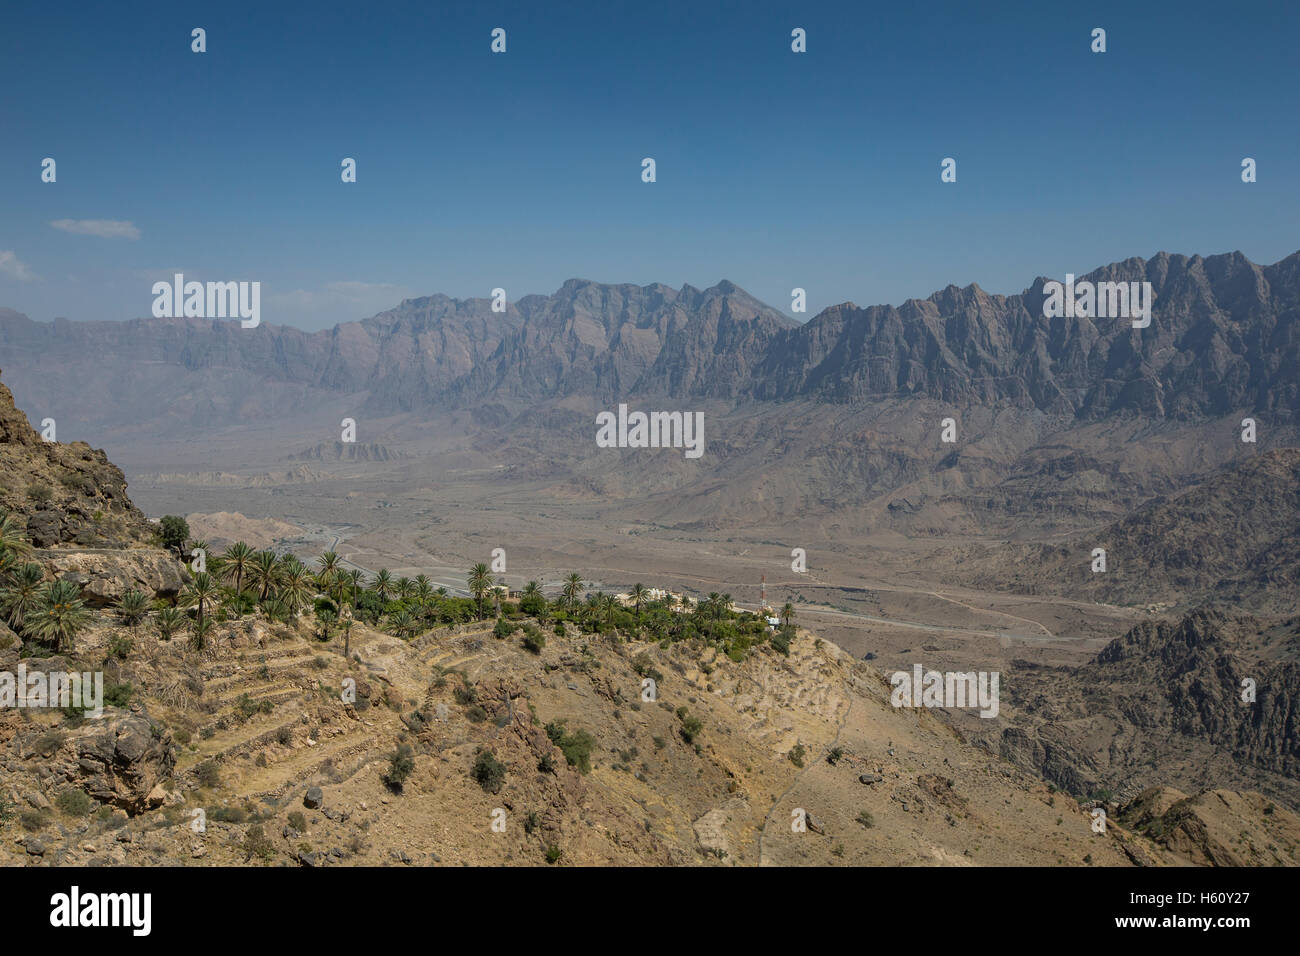 village in mountains of remote area of Oman Stock Photo